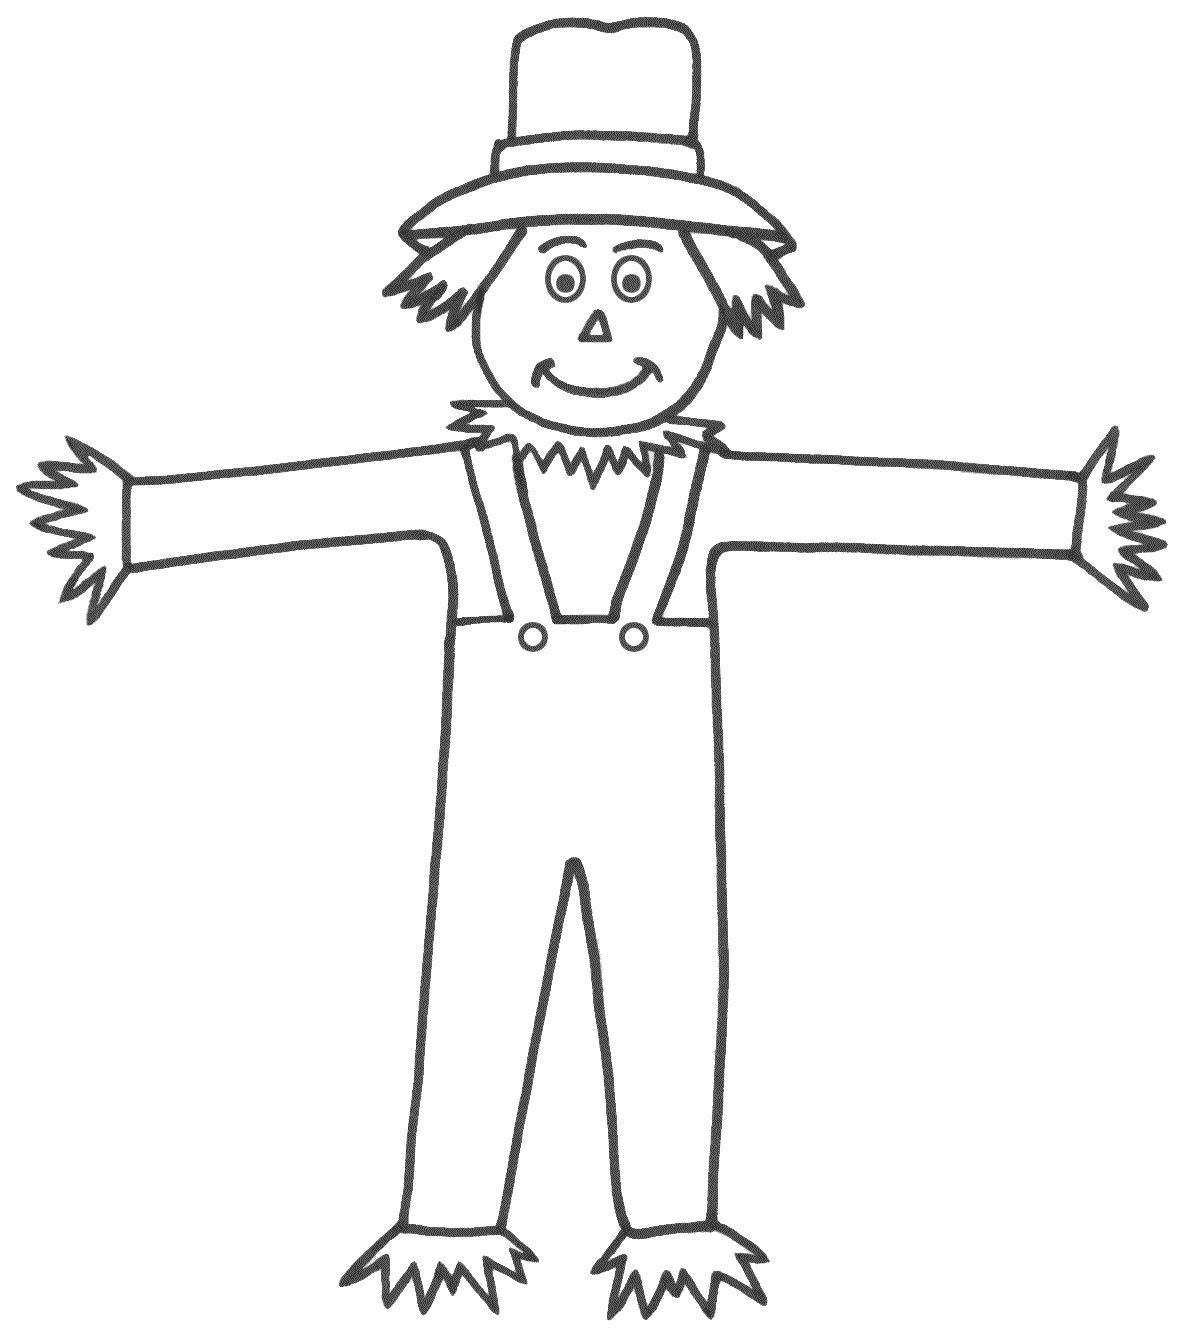 scarecrow coloring pages - Free Large Images